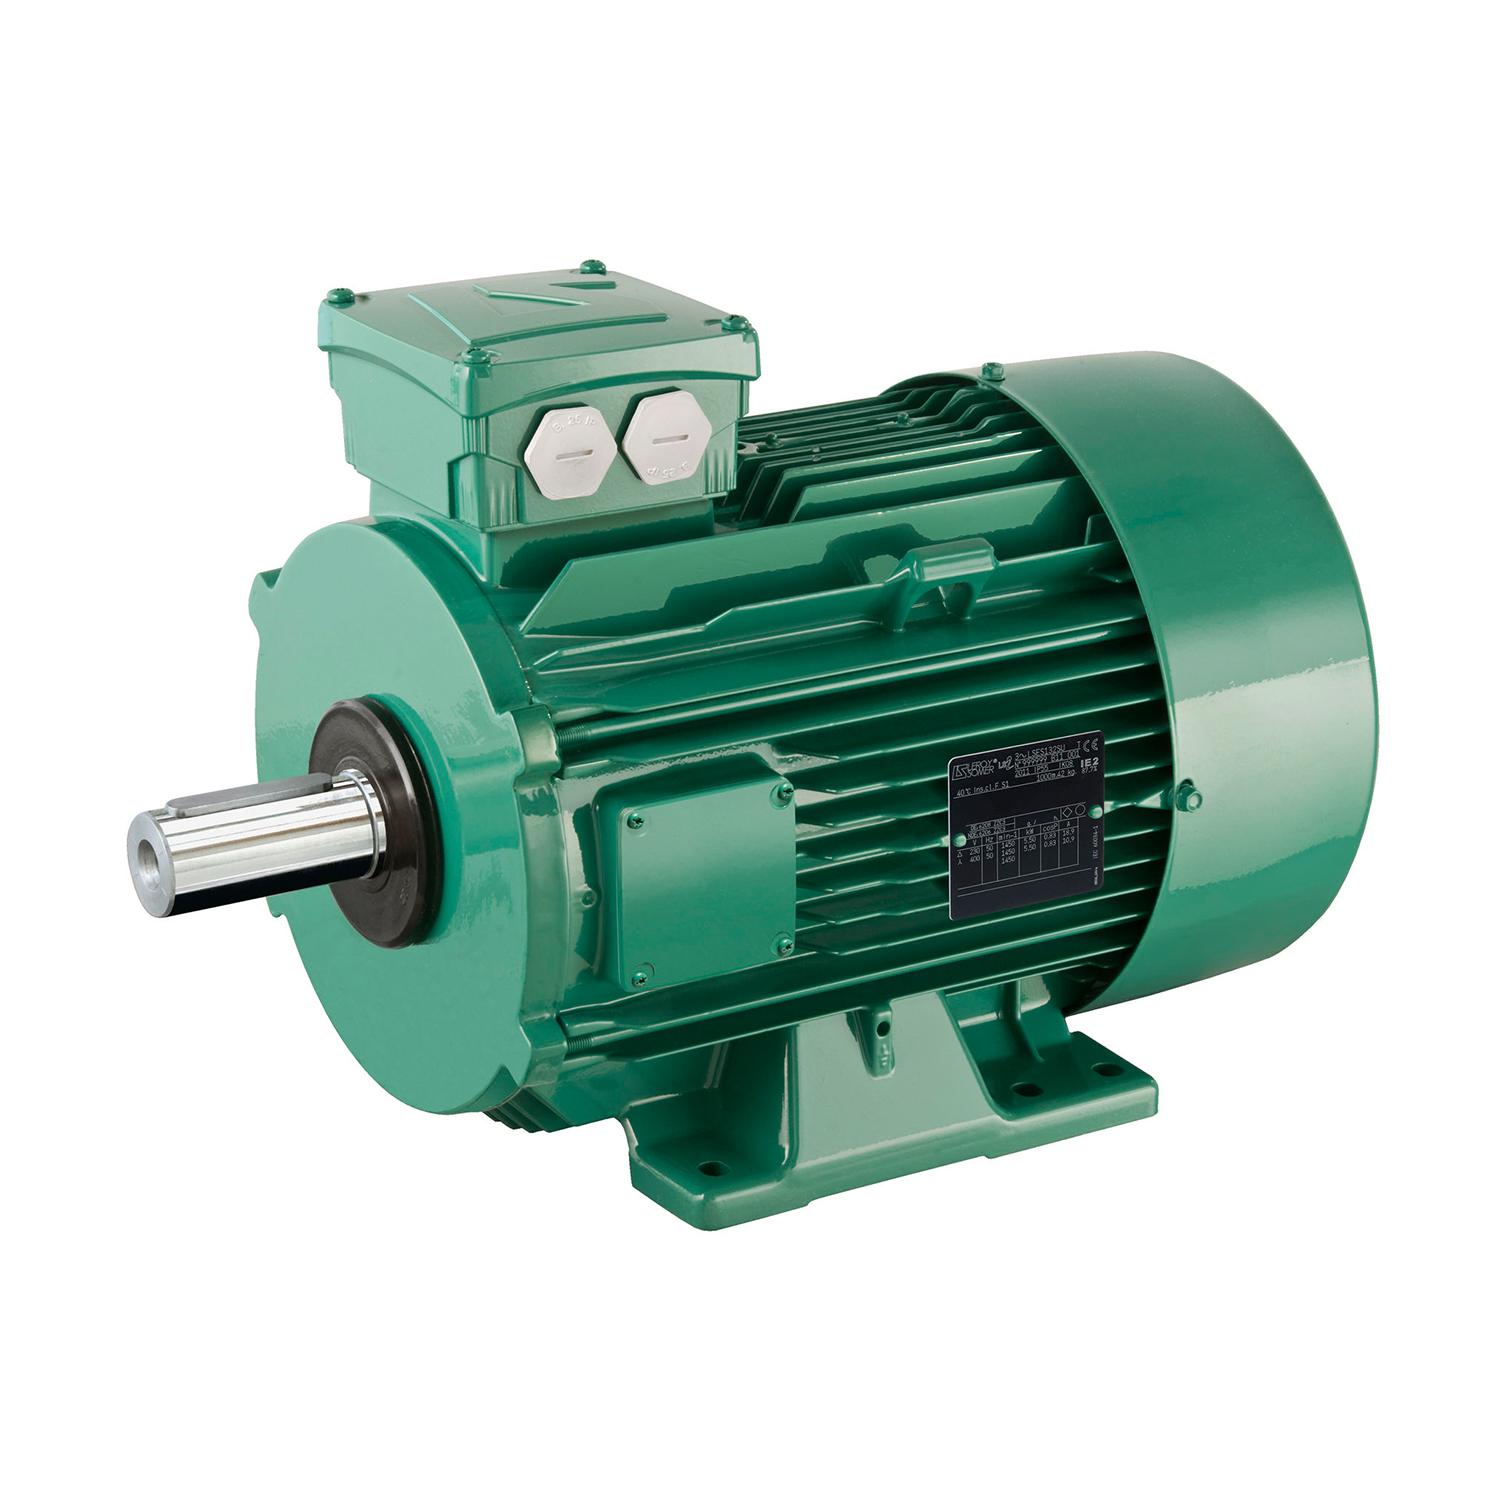 AC Motor2 difference between DC motor and AC motor